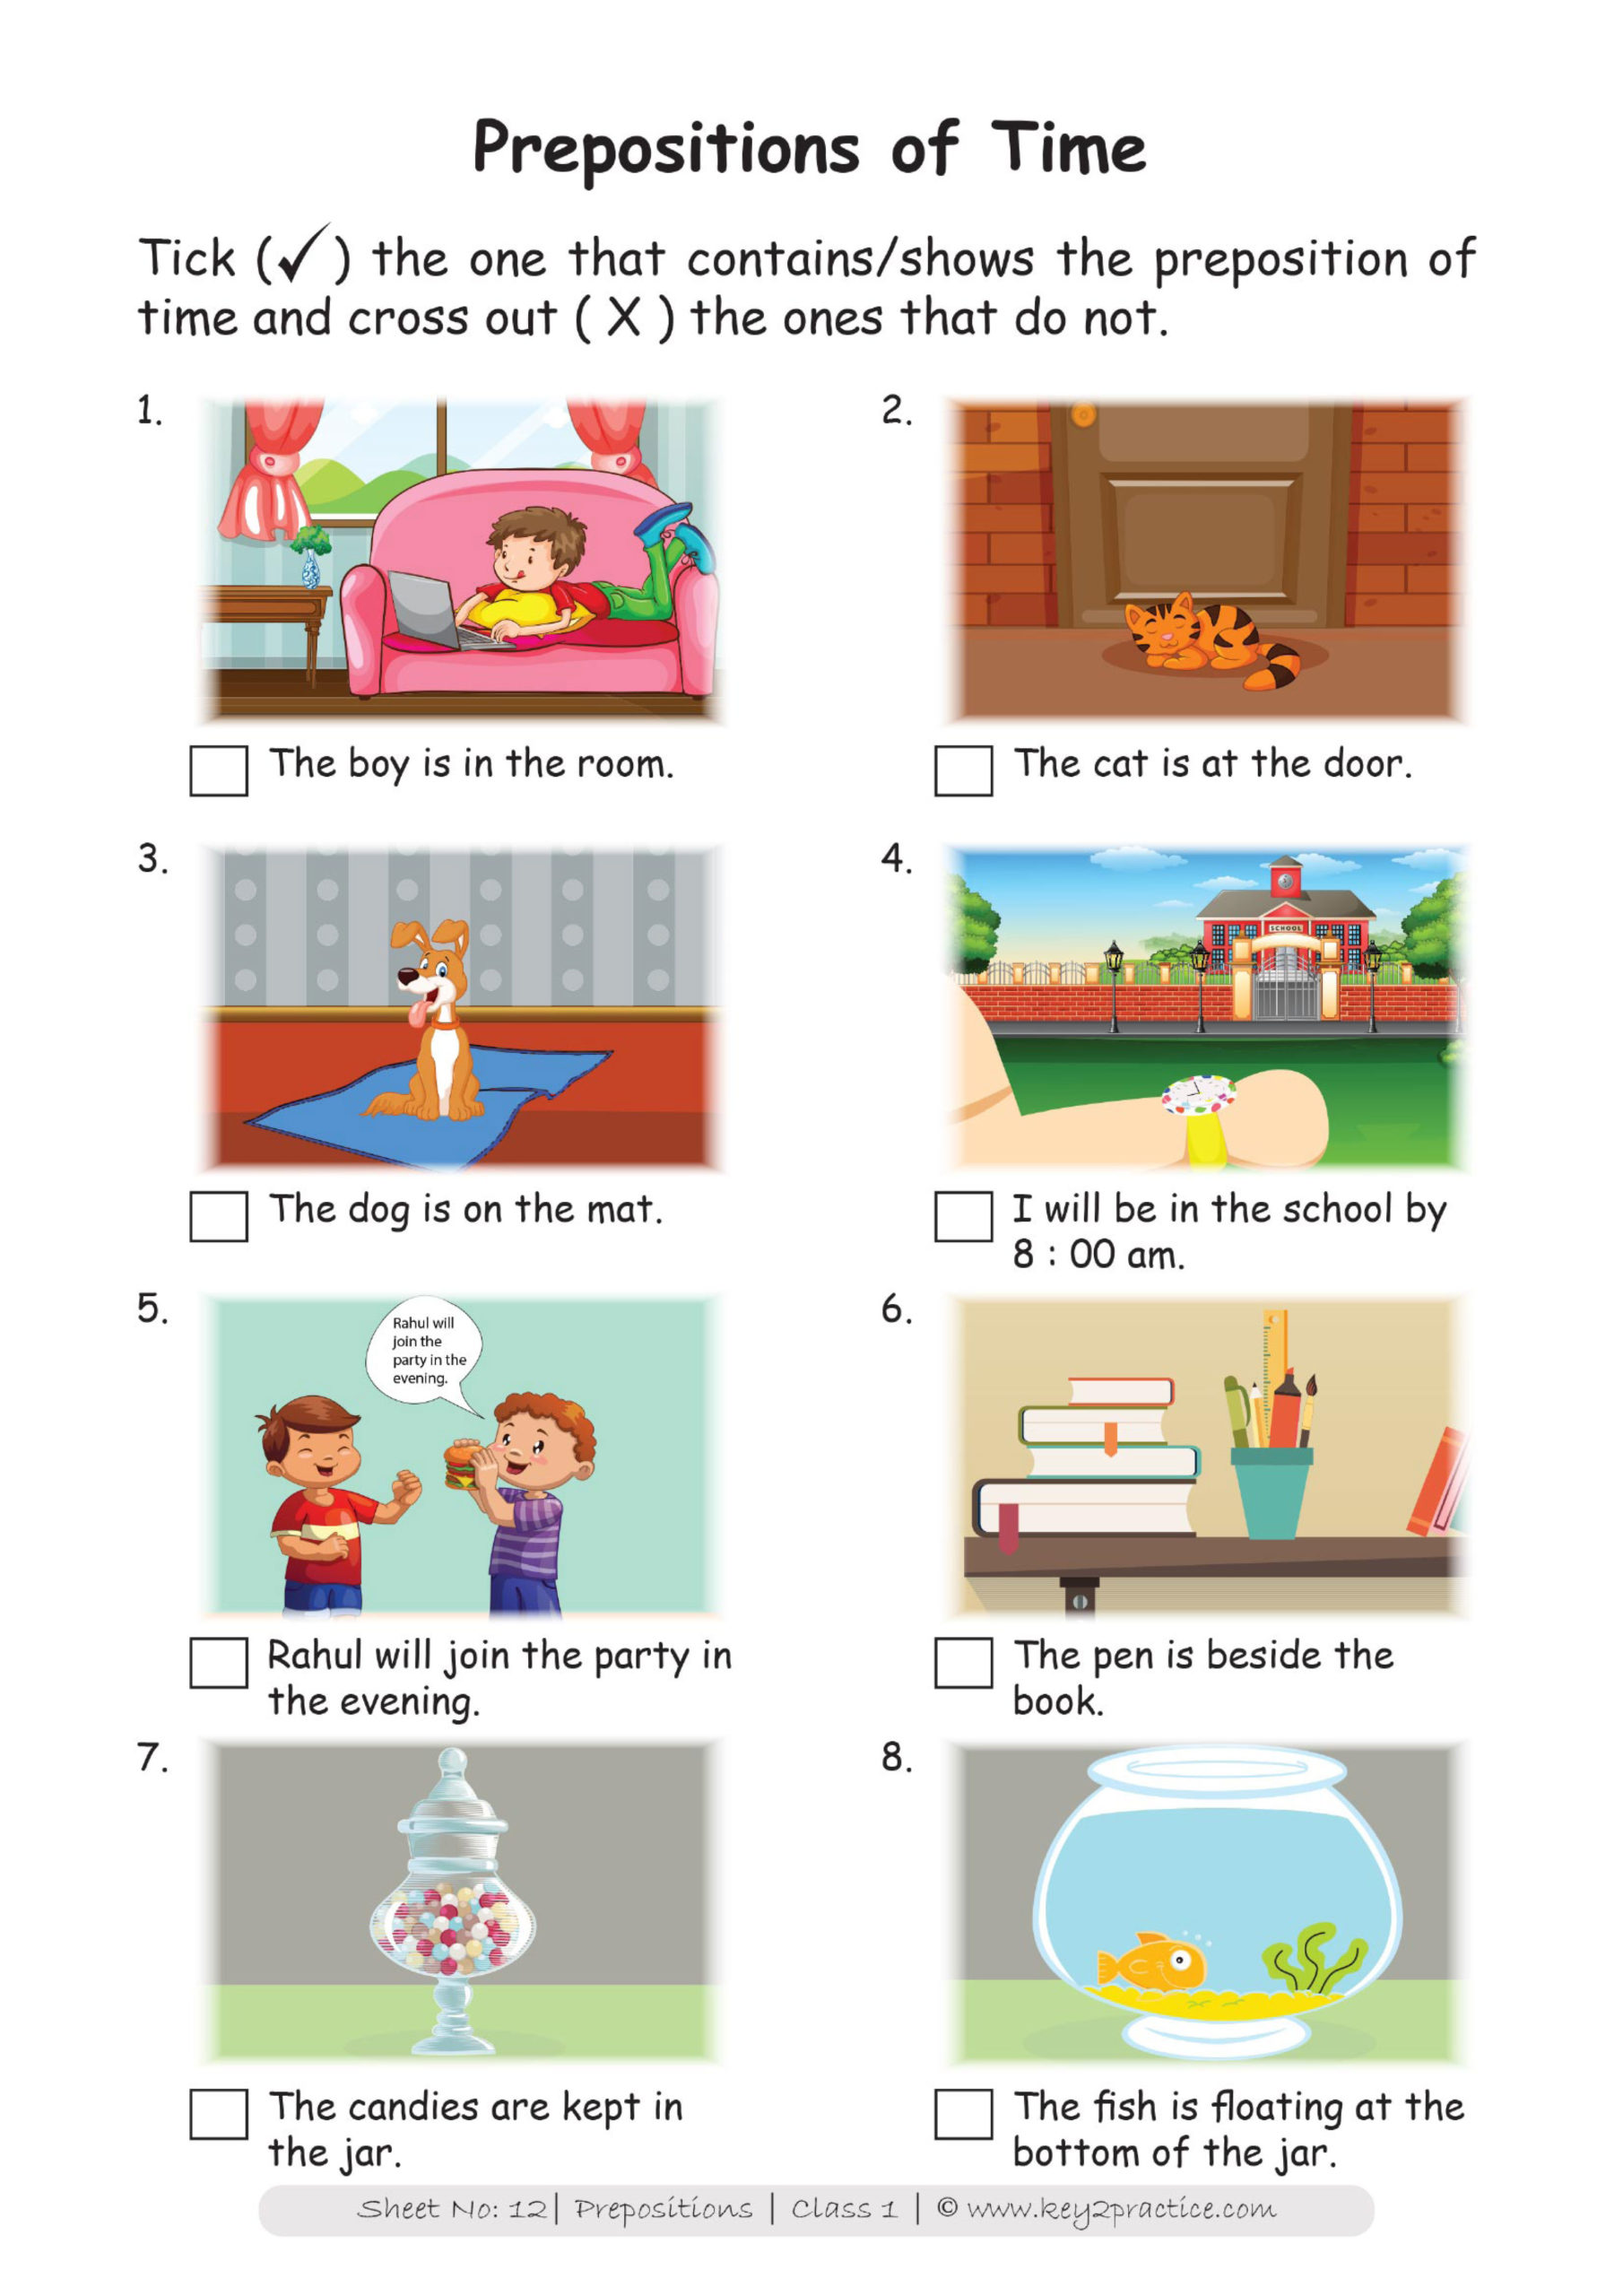 prepositions-of-place-interactive-and-downloadable-worksheet-check-your-answers-onl-english